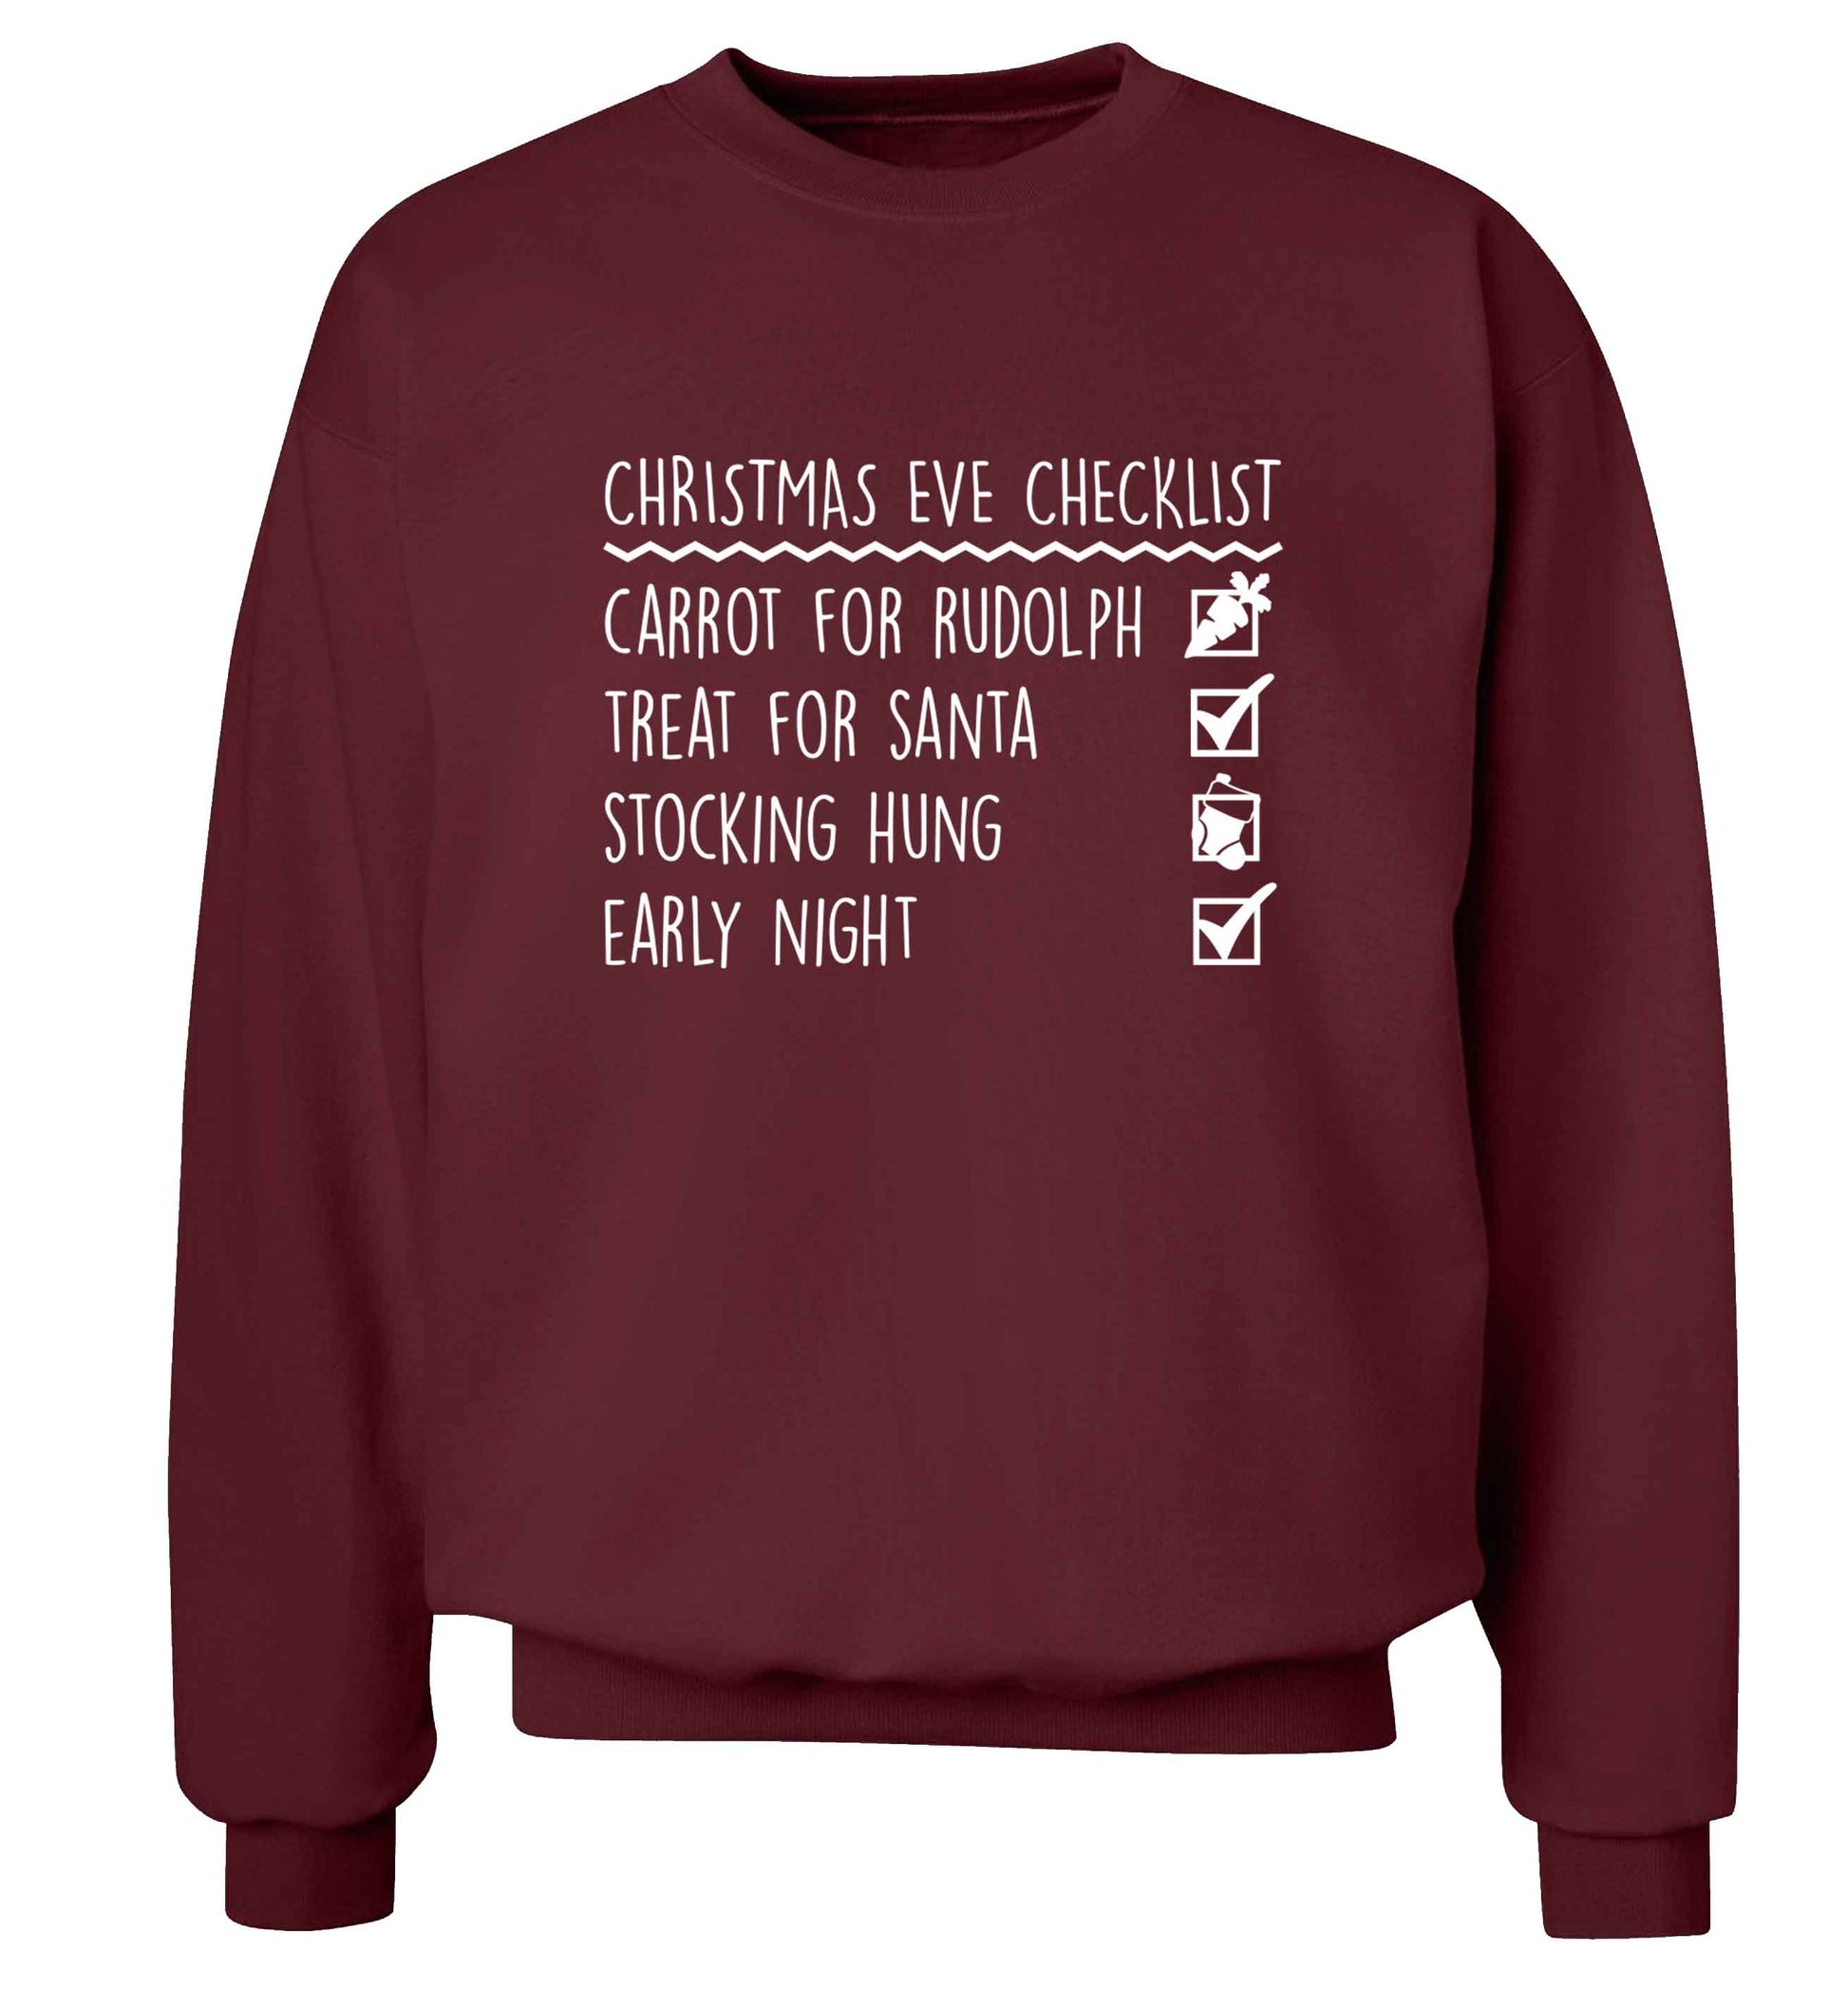 Candy Canes Candy Corns adult's unisex maroon sweater 2XL